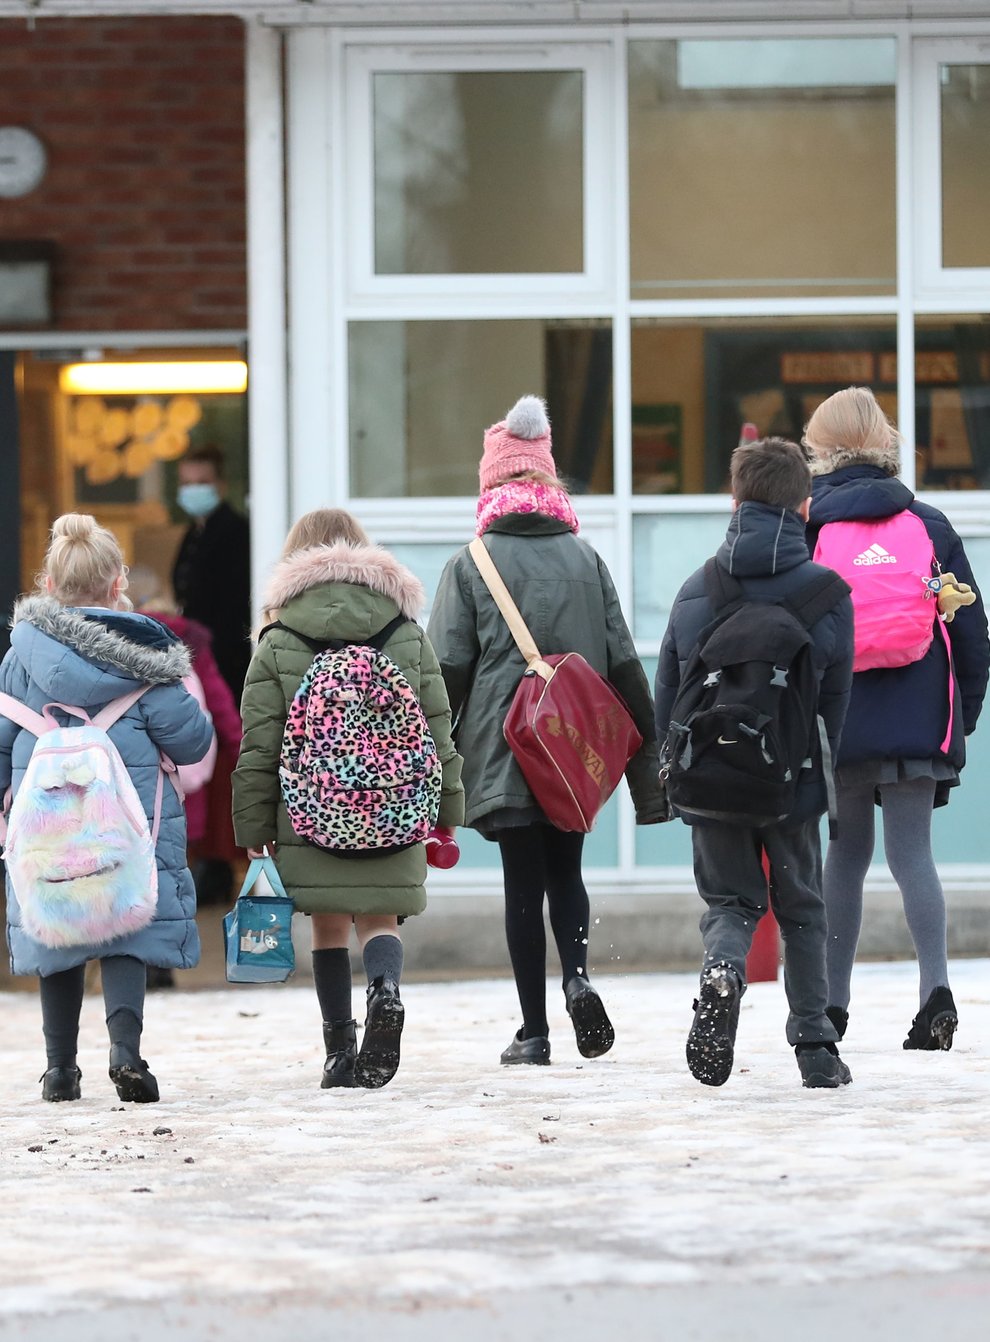 Nearly one in four primary school children were in class, figures show